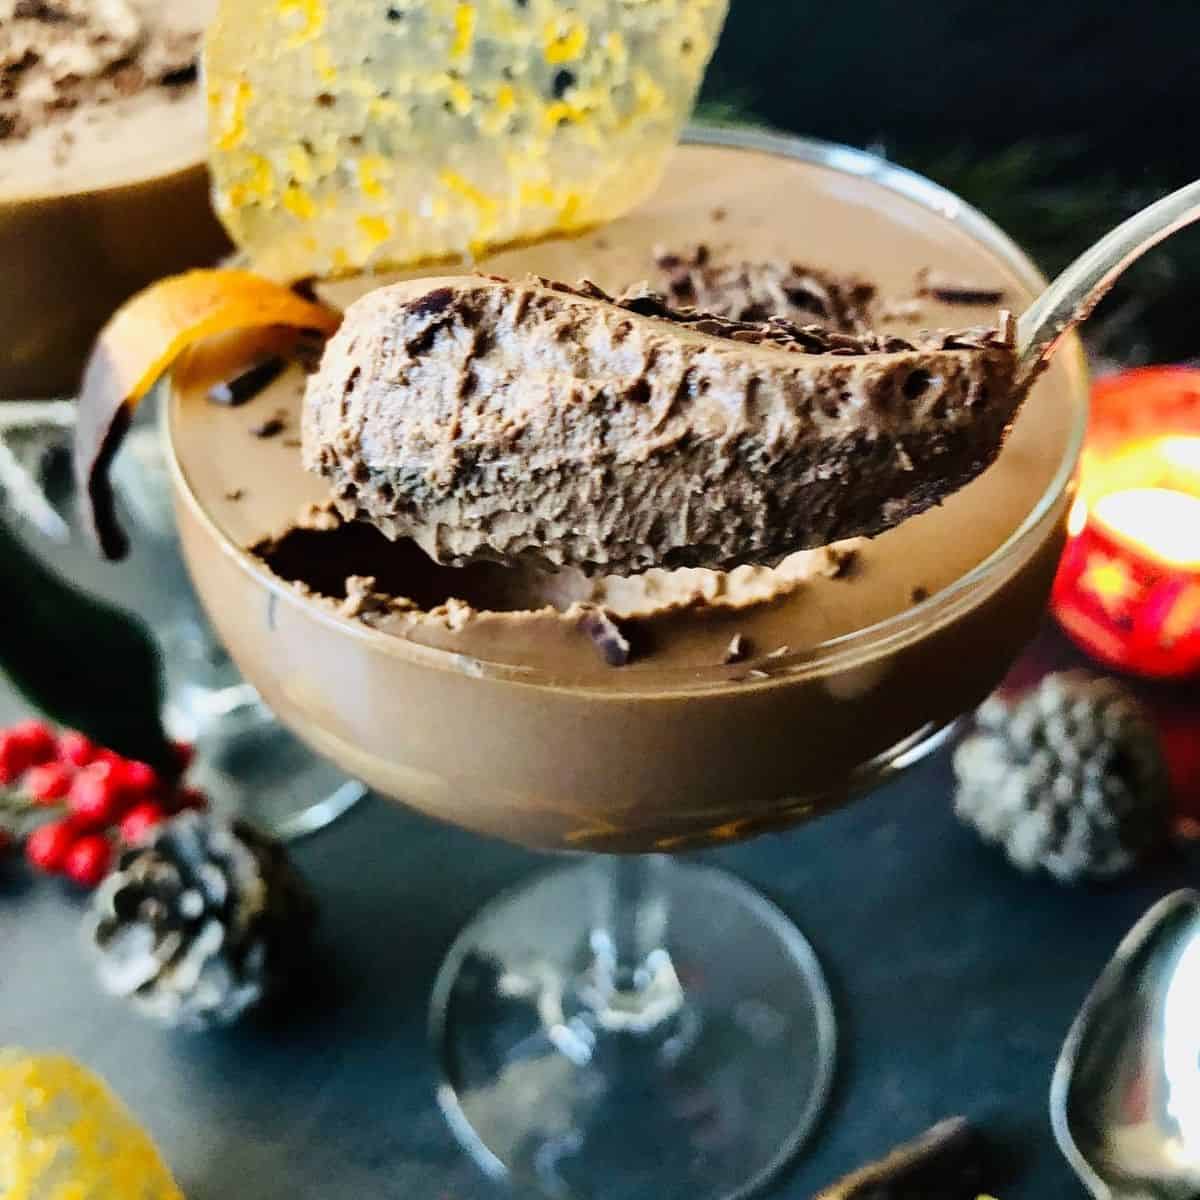 Scoop of vegan Chocolate mousse on a teaspoon held above champagne glass containing the vegan chocolate mousse 